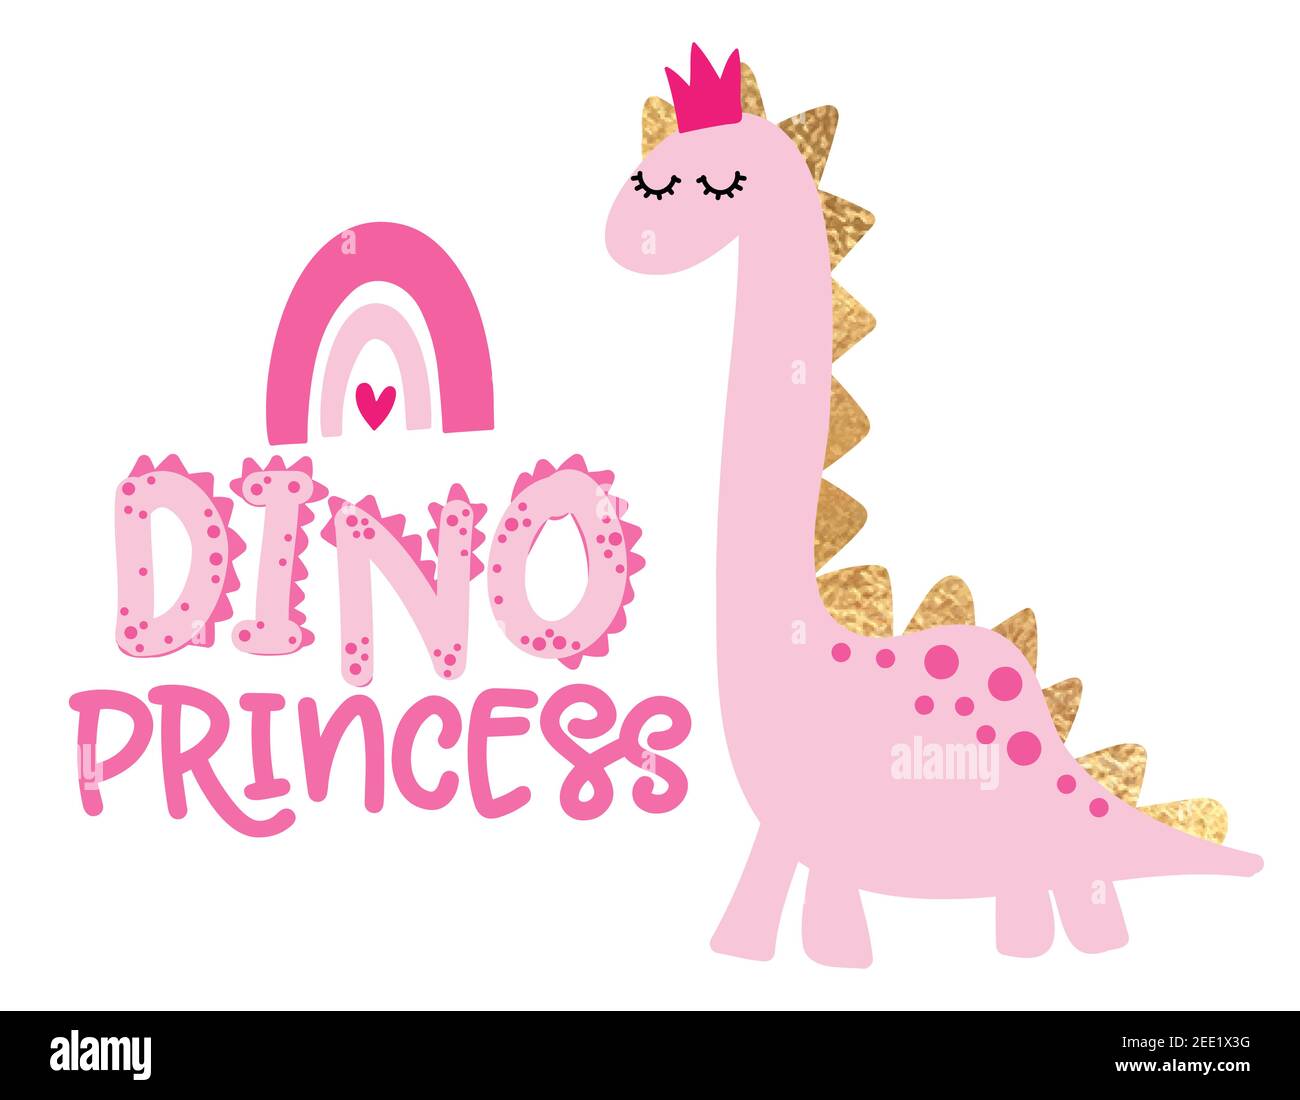 dino-princess-funny-hand-drawn-doodle-cartoon-dino-good-for-poster-or-t-shirt-textile-graphic-design-vector-hand-drawn-illustration-dinosaur-que-2EE1X3G.jpg